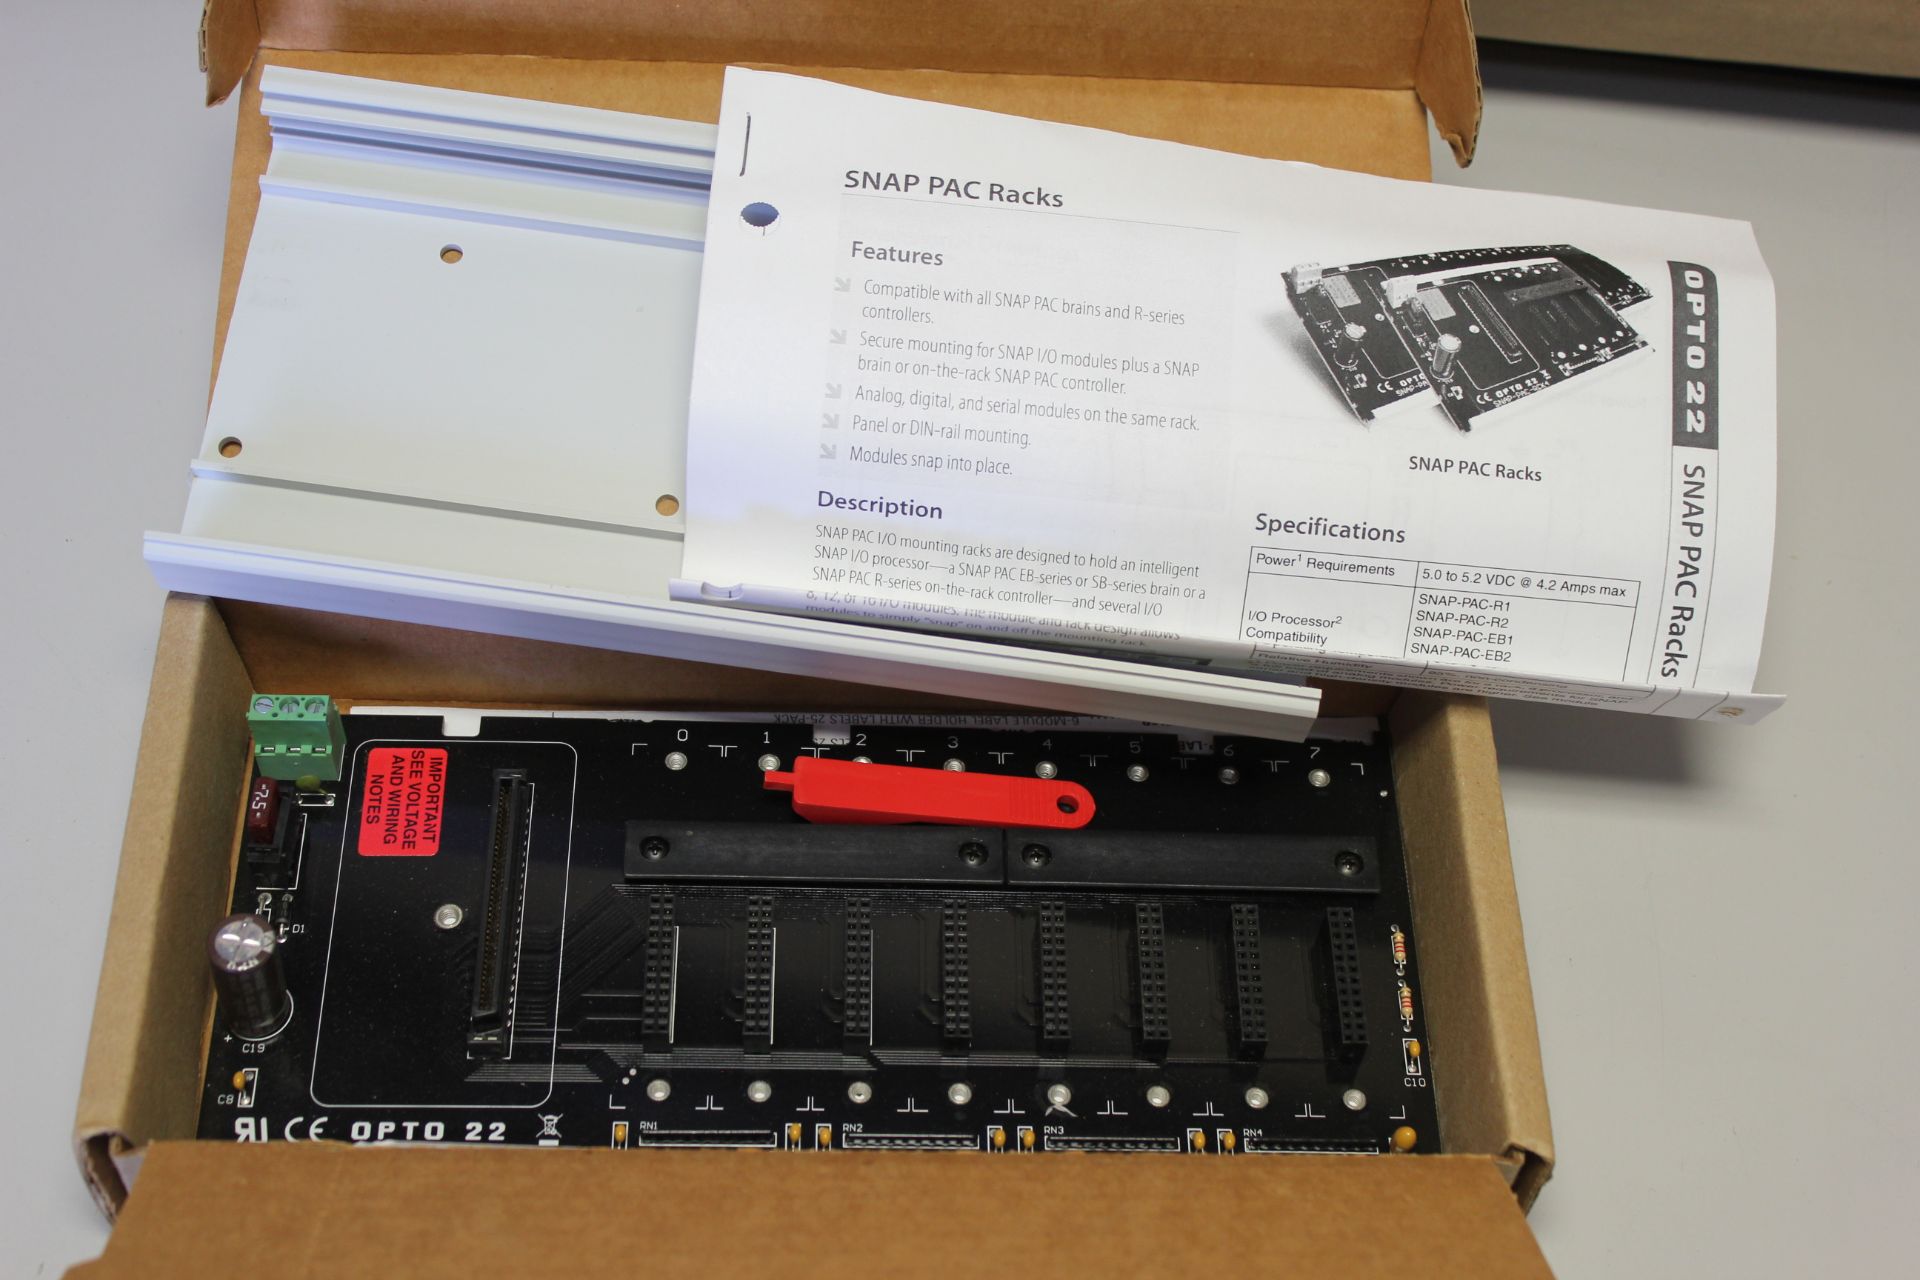 NEW OPTO 22 8 POSITION SNAP PAC RACK - Image 4 of 5